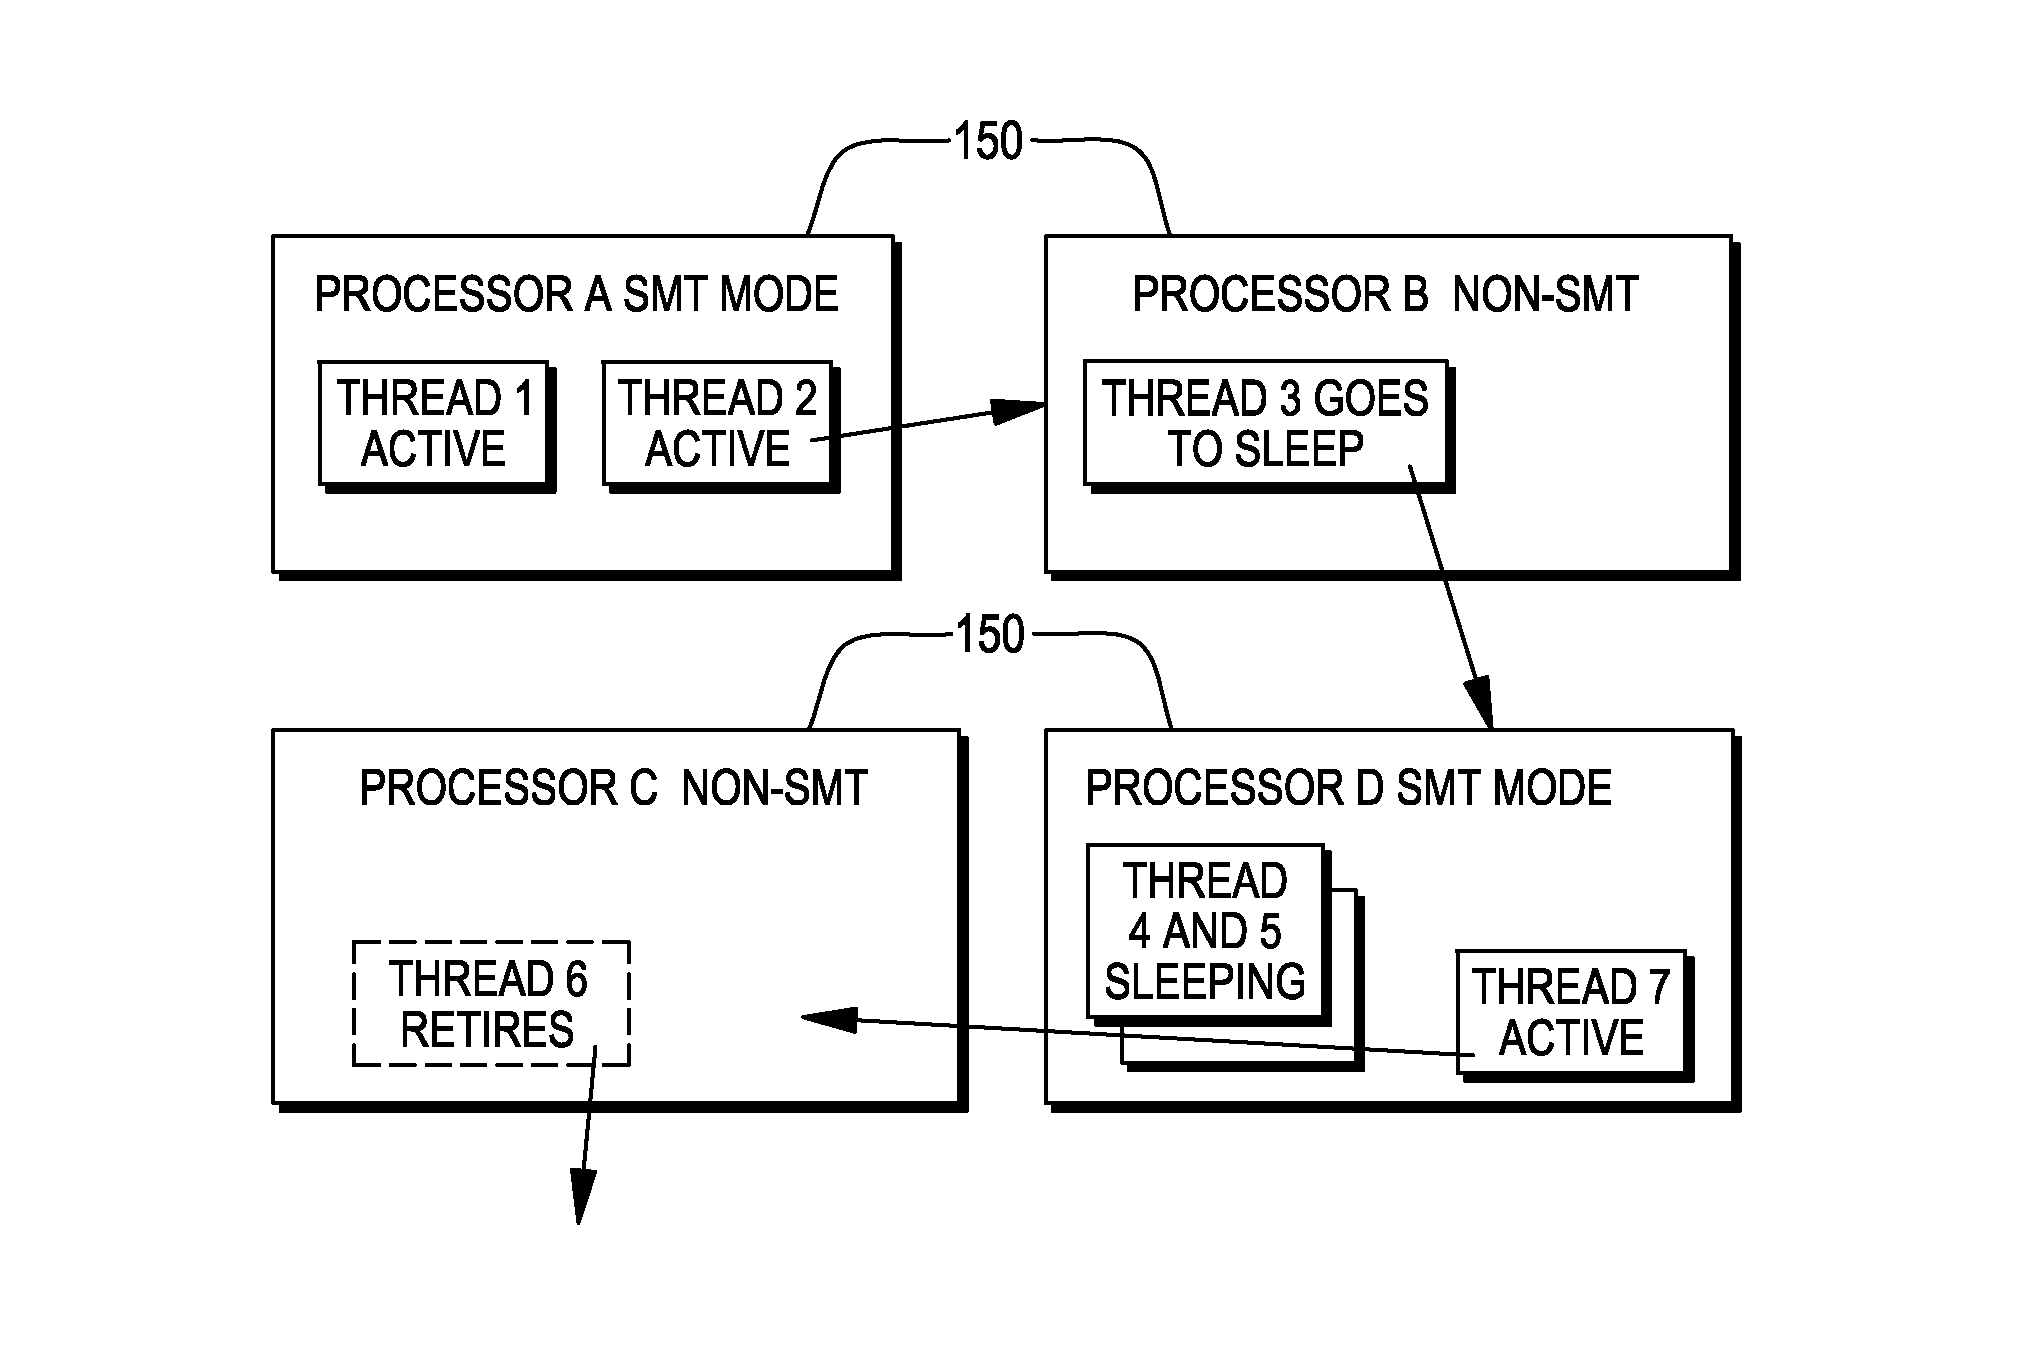 Management of threads within a computing environment